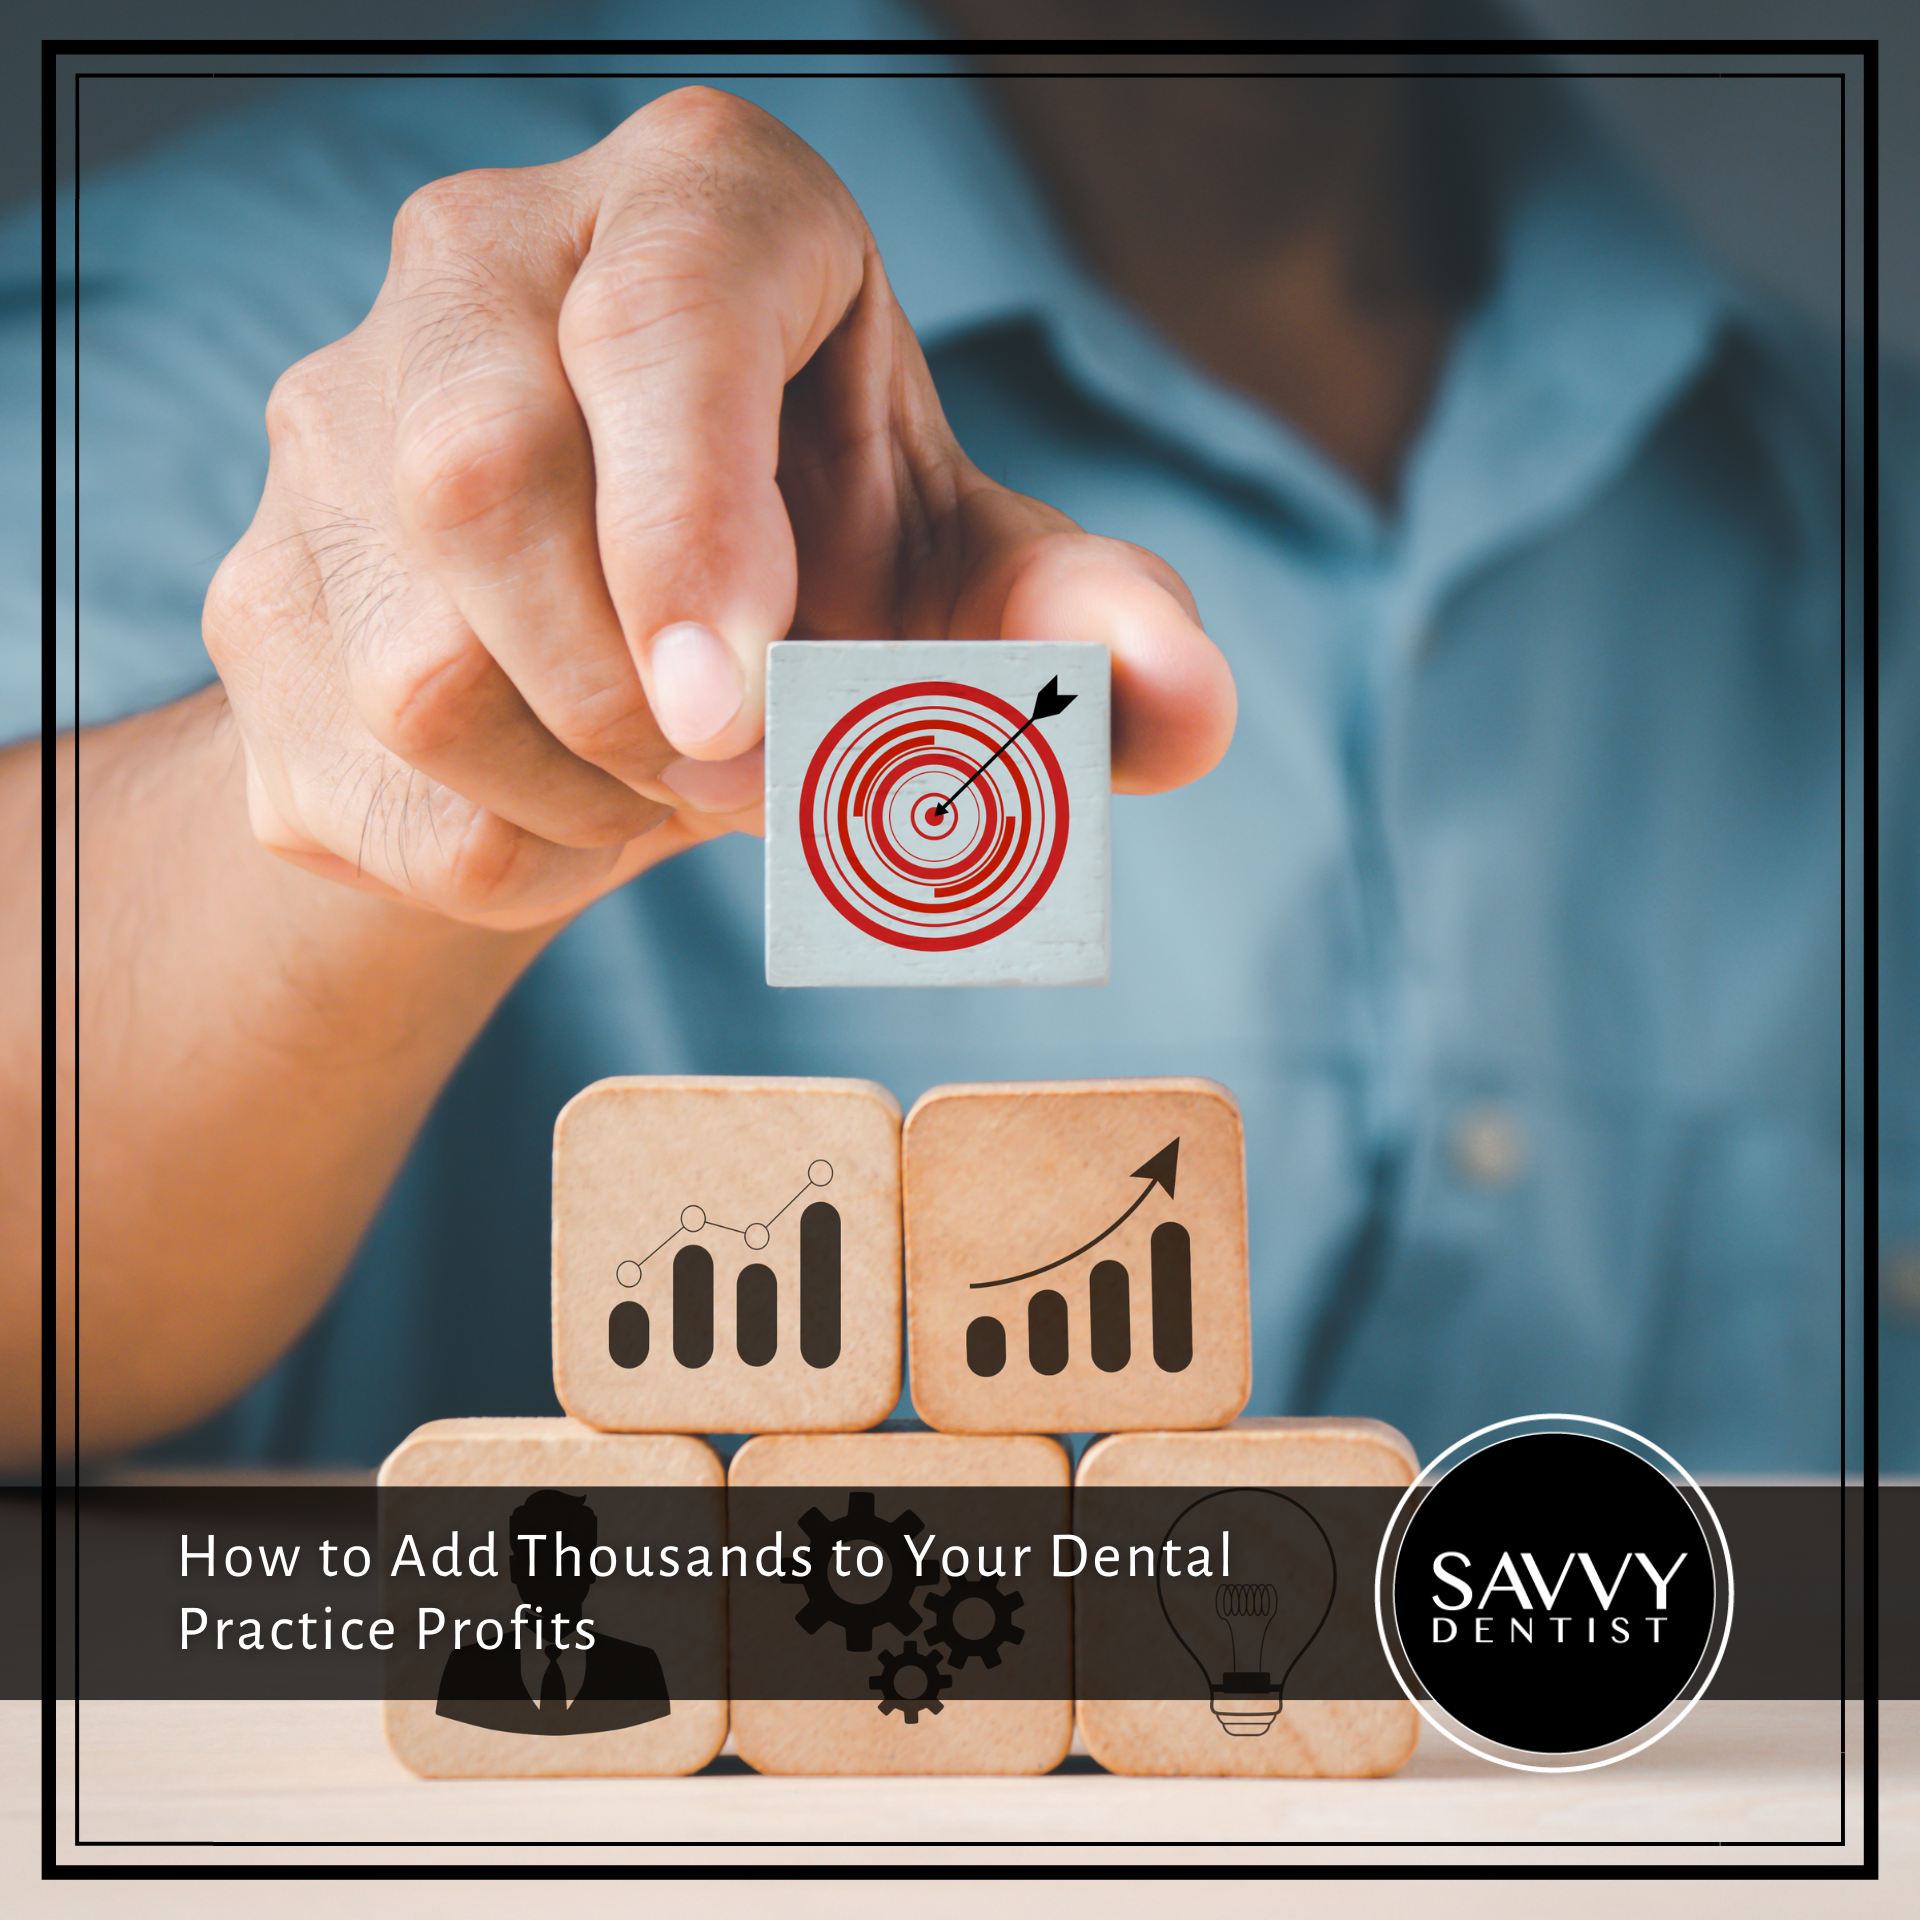 How to Add Thousands to Your Dental Practice Profits